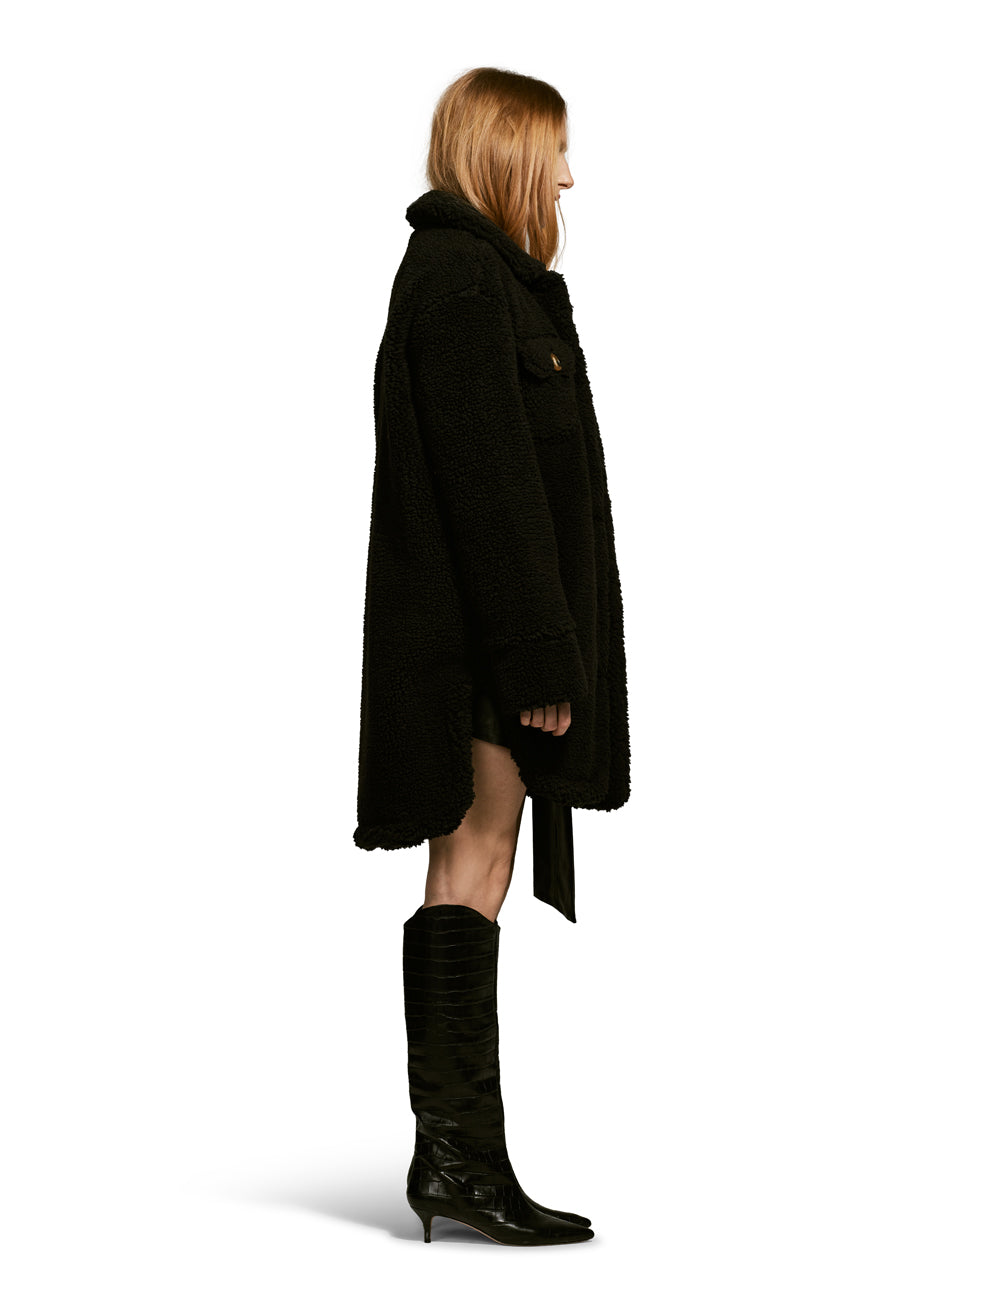 Model wearing the Ash, a teddy-inspired faux-fur sherpa shell with a laid-back silhouette in Charcoal.